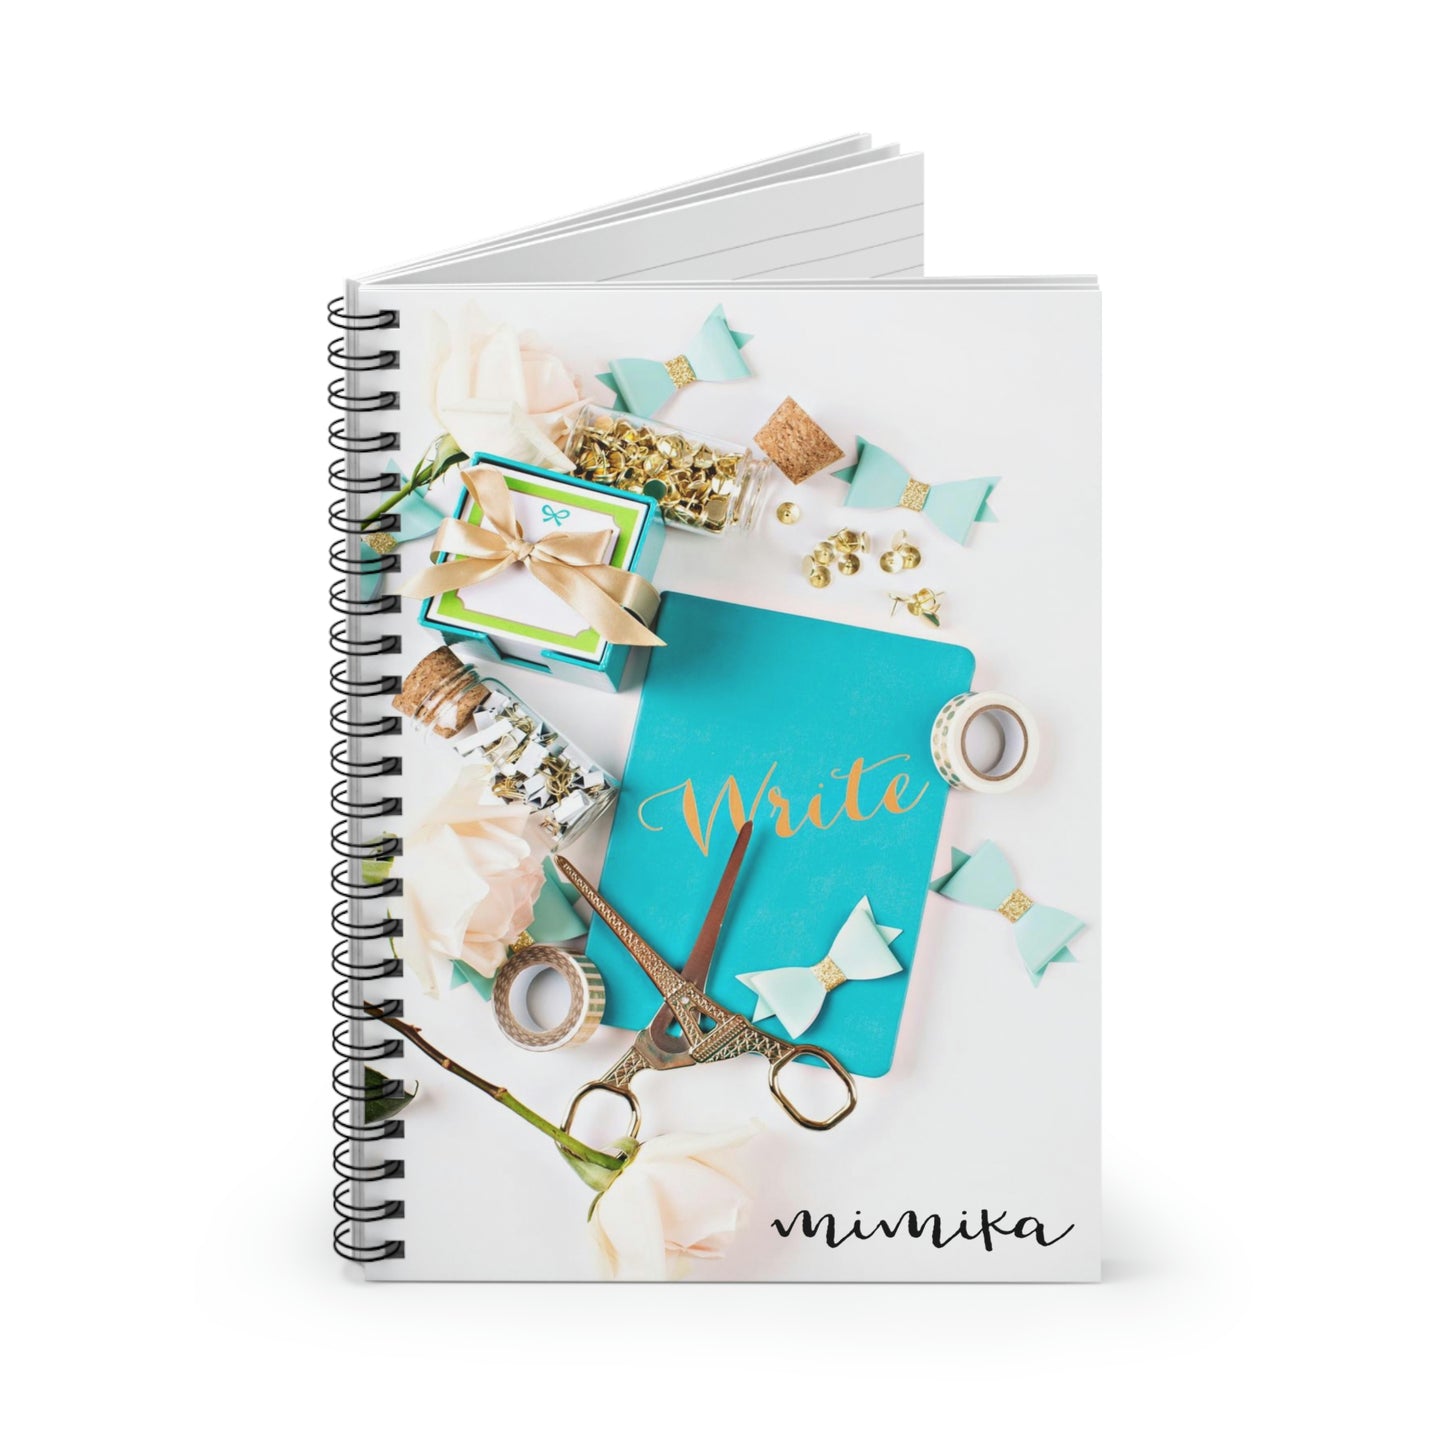 Spiral Notebook - Ruled Line (Turquoise Gold Scissors Bows)